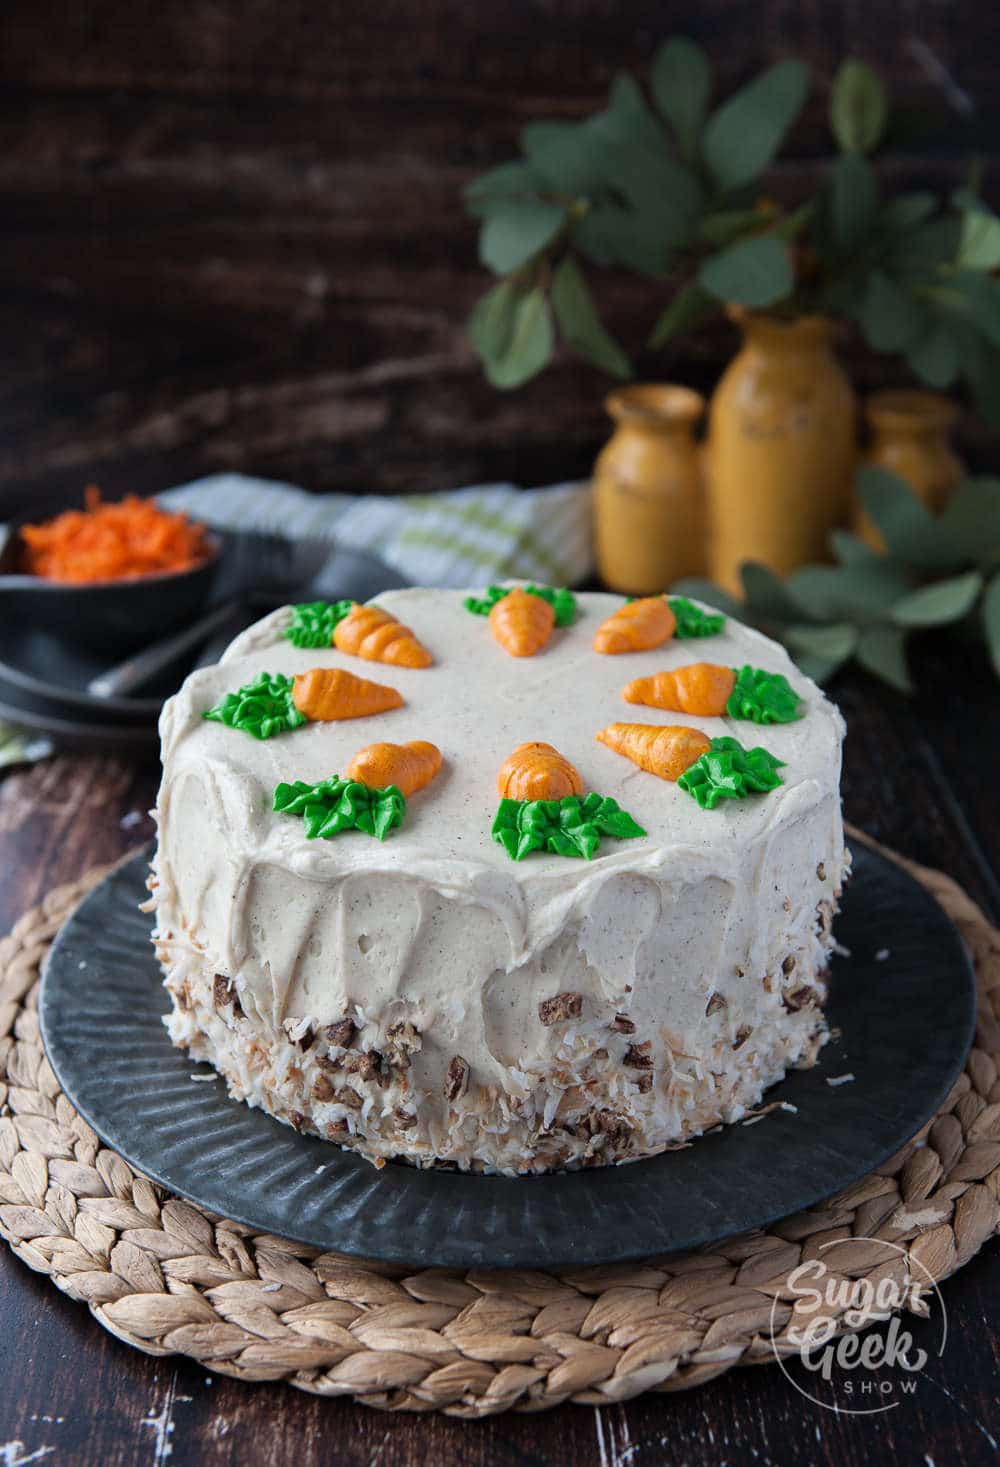 Homestyle carrot cake with pineapple, toasted coconut, candied pecans and big chunks of carrots. Frosted with brown butter cream cheese frosting and buttercream carrots